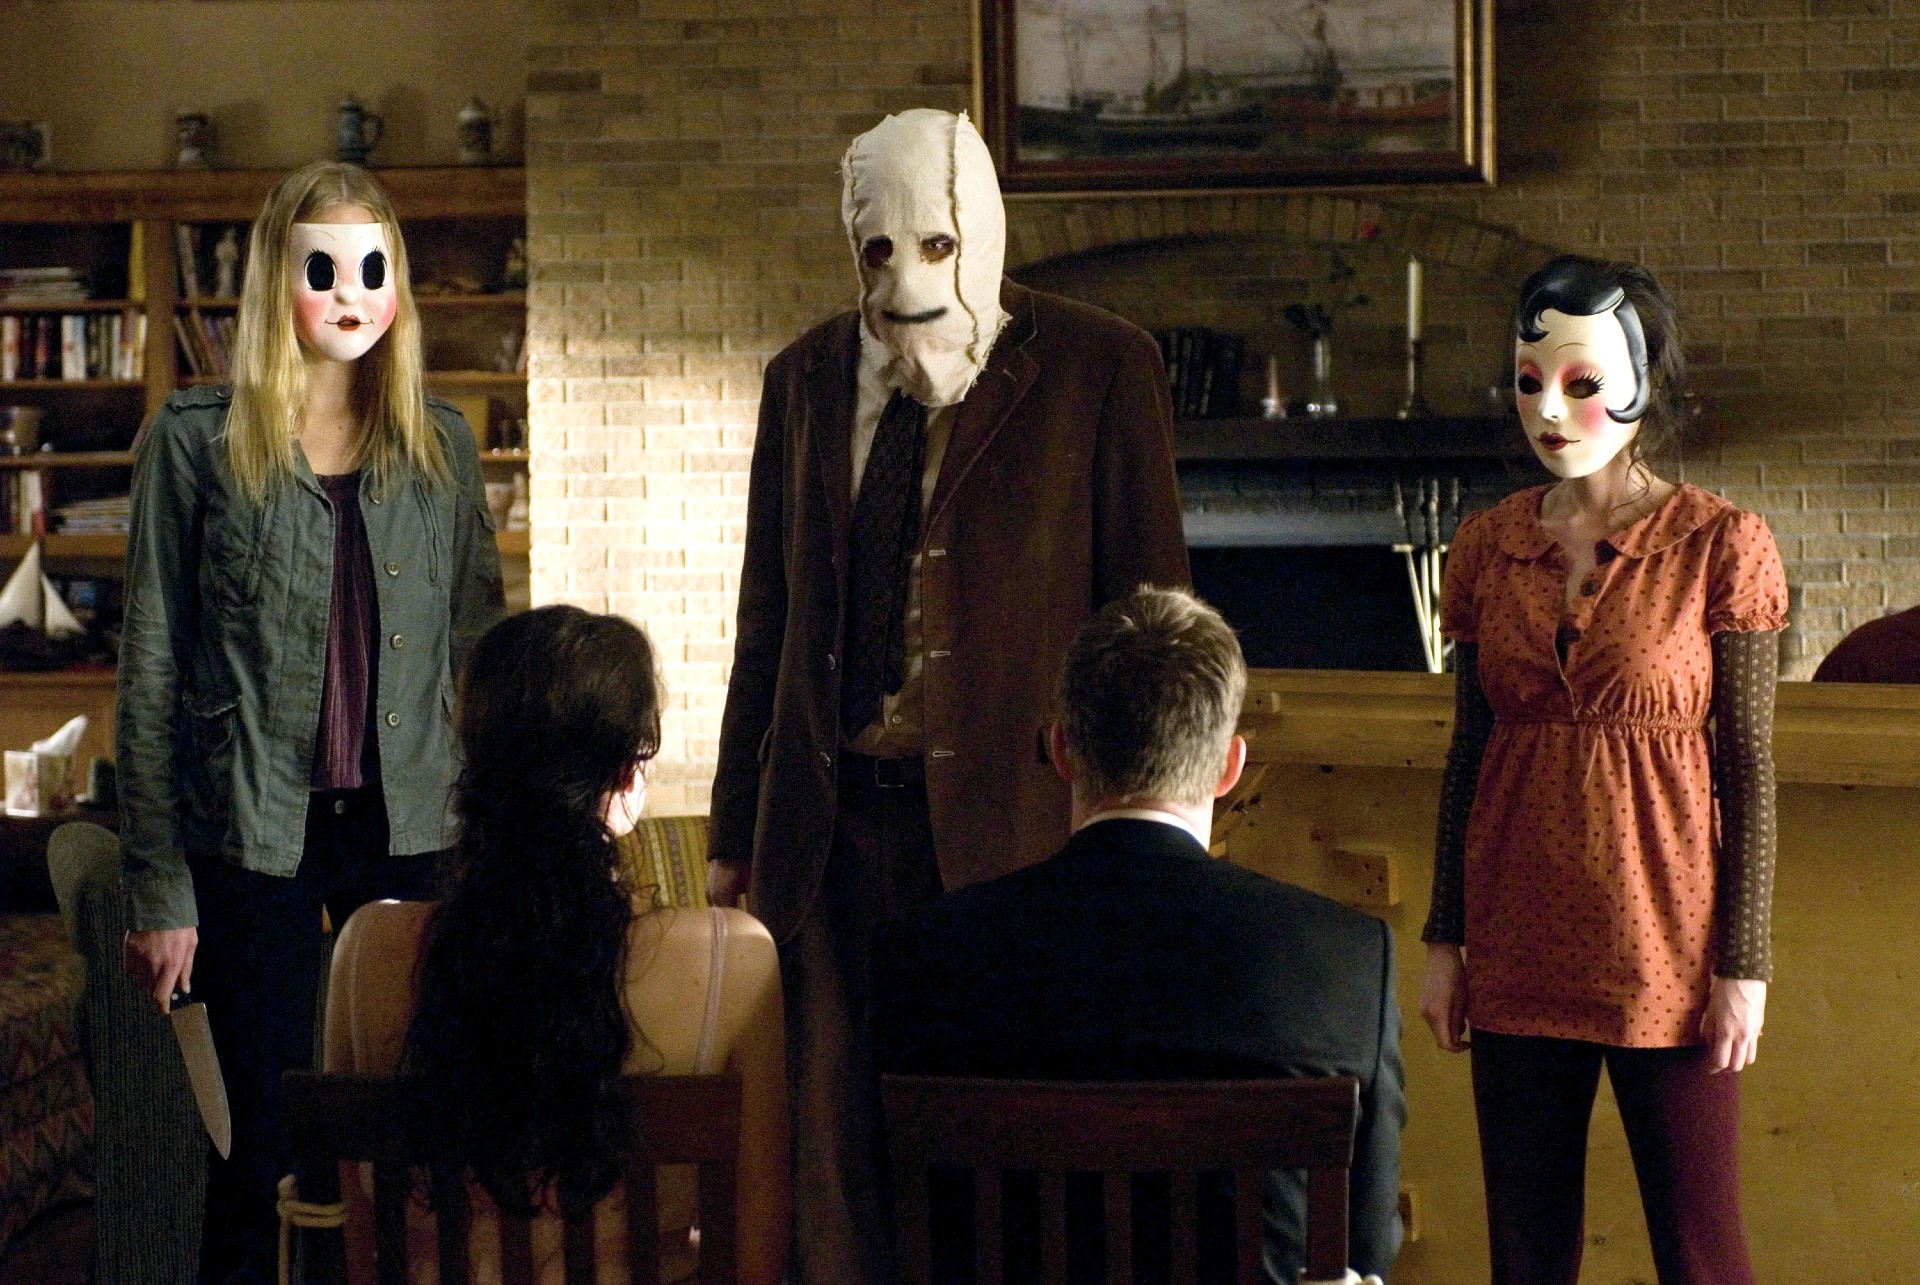 Three masked figures stand in front of a couple in The Strangers.